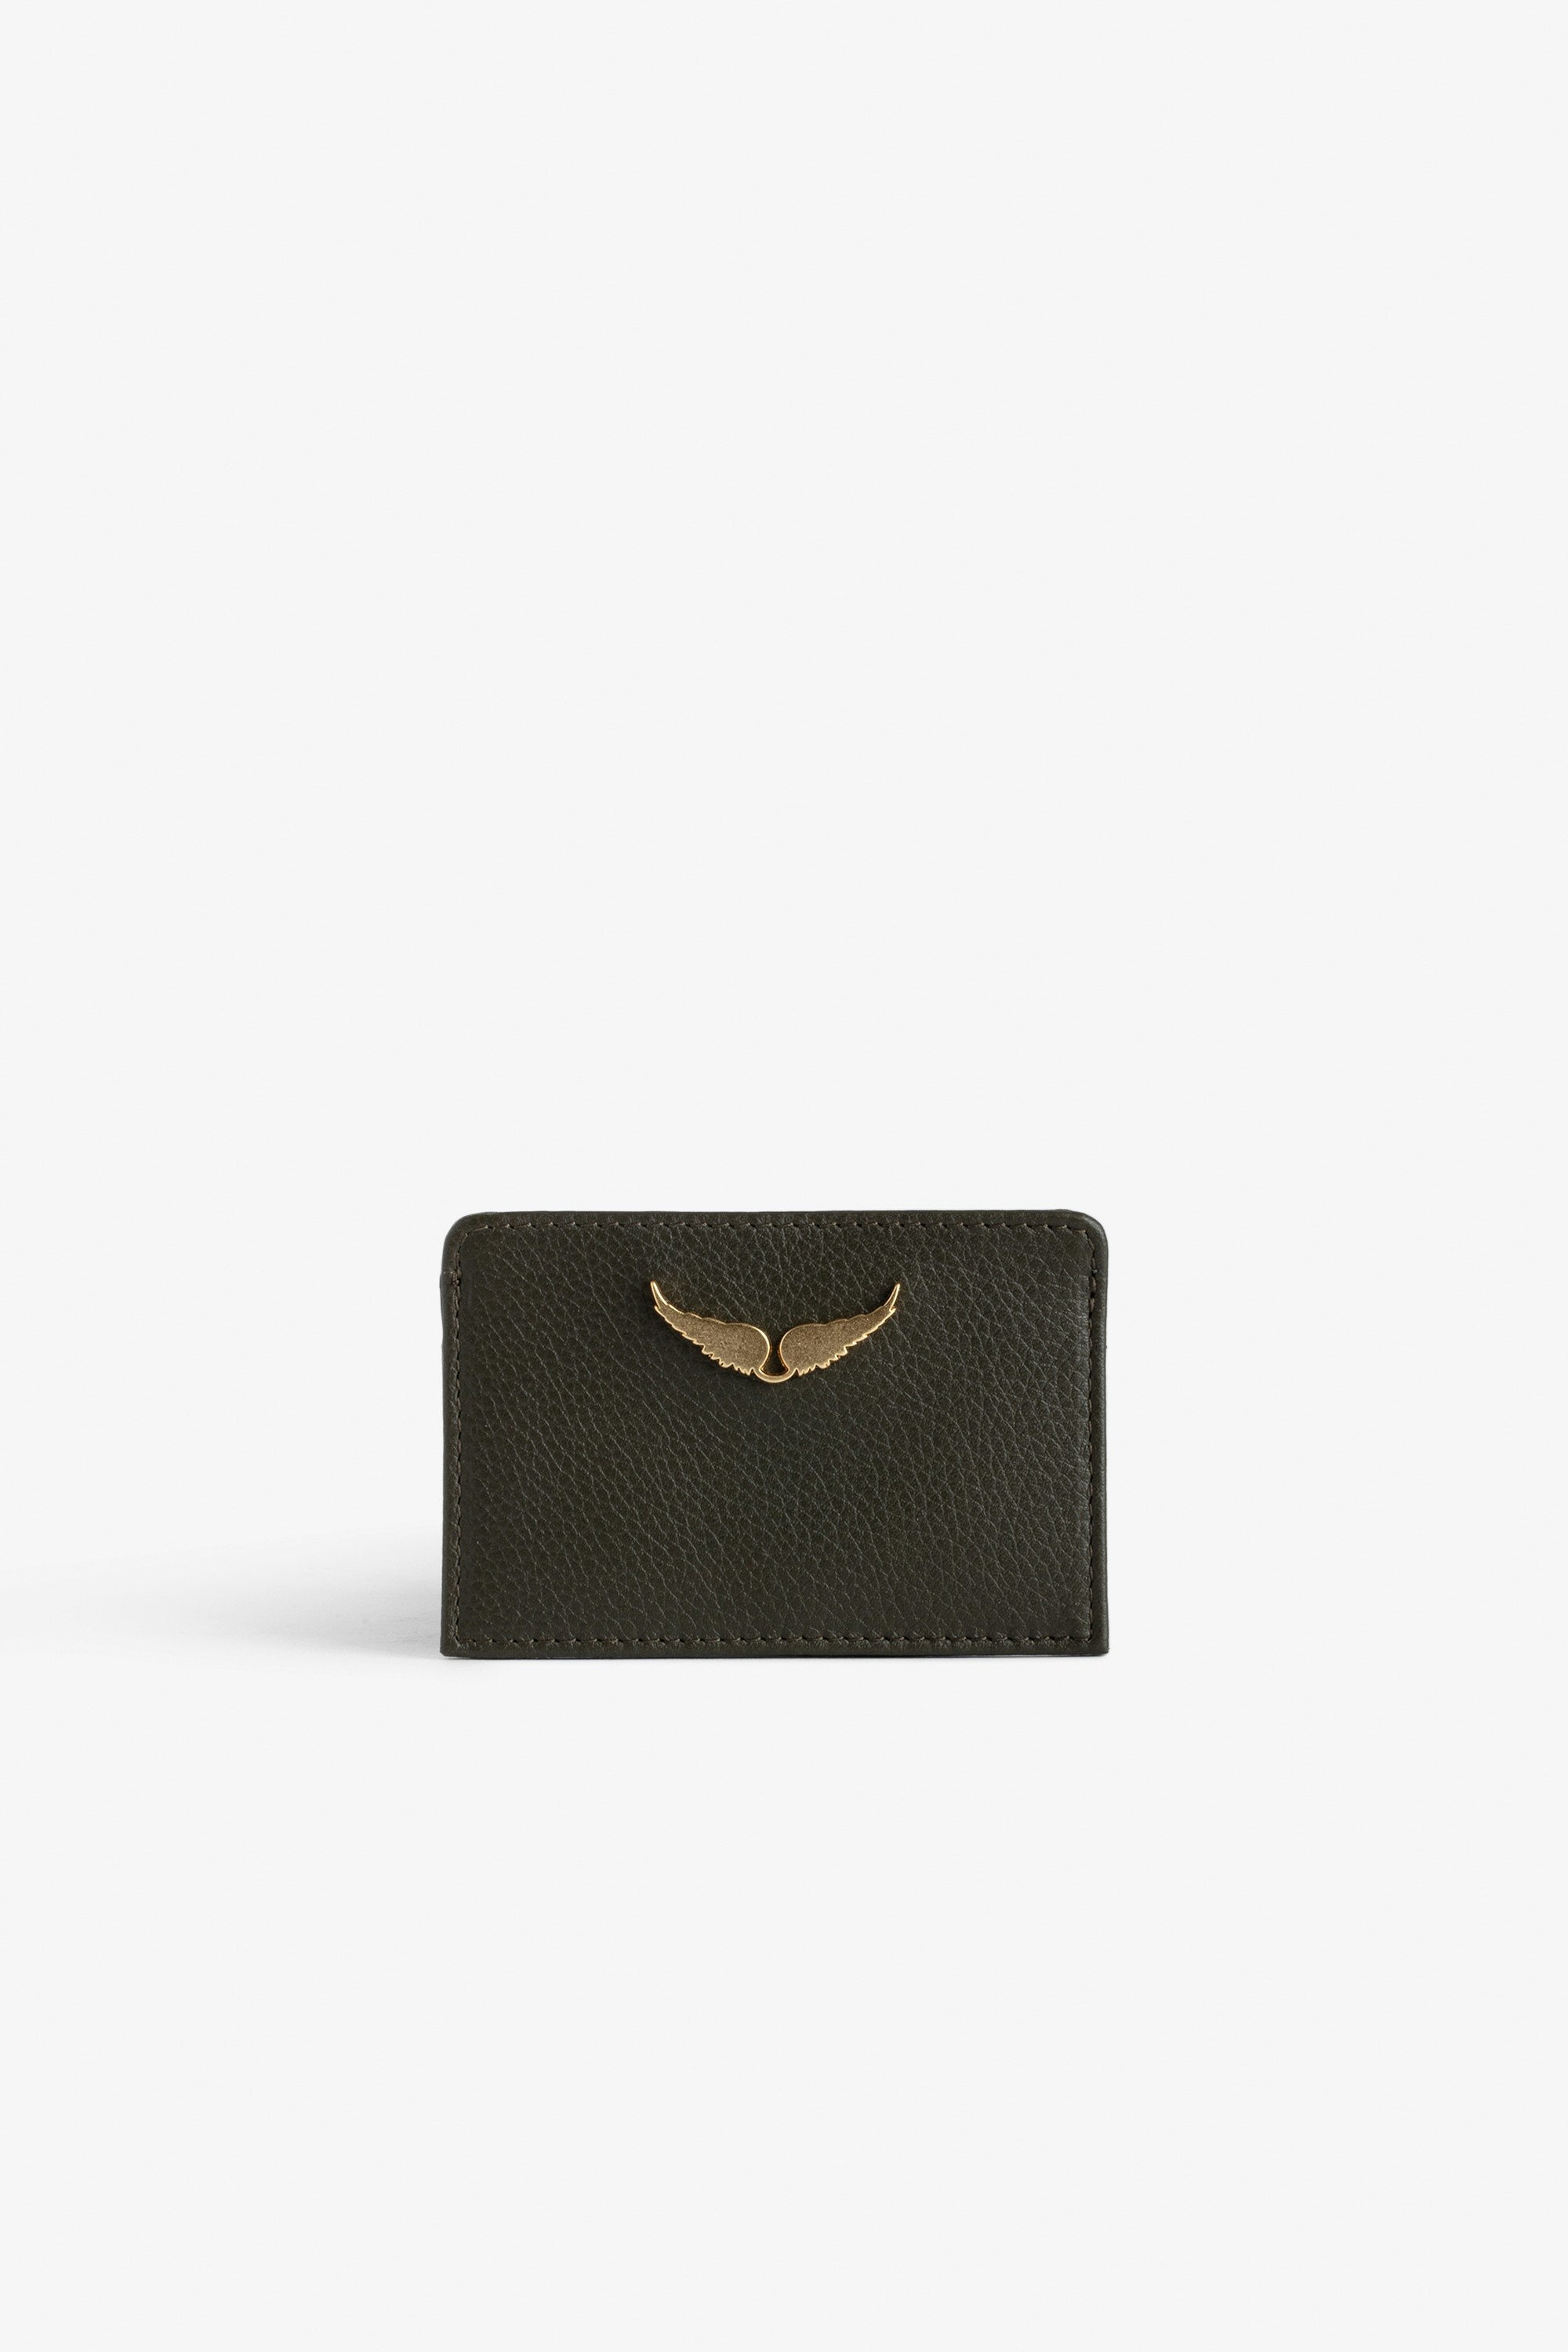 ZV Pass カードホルダー - Women’s khaki grained leather card holder with gold-tone wings charm.